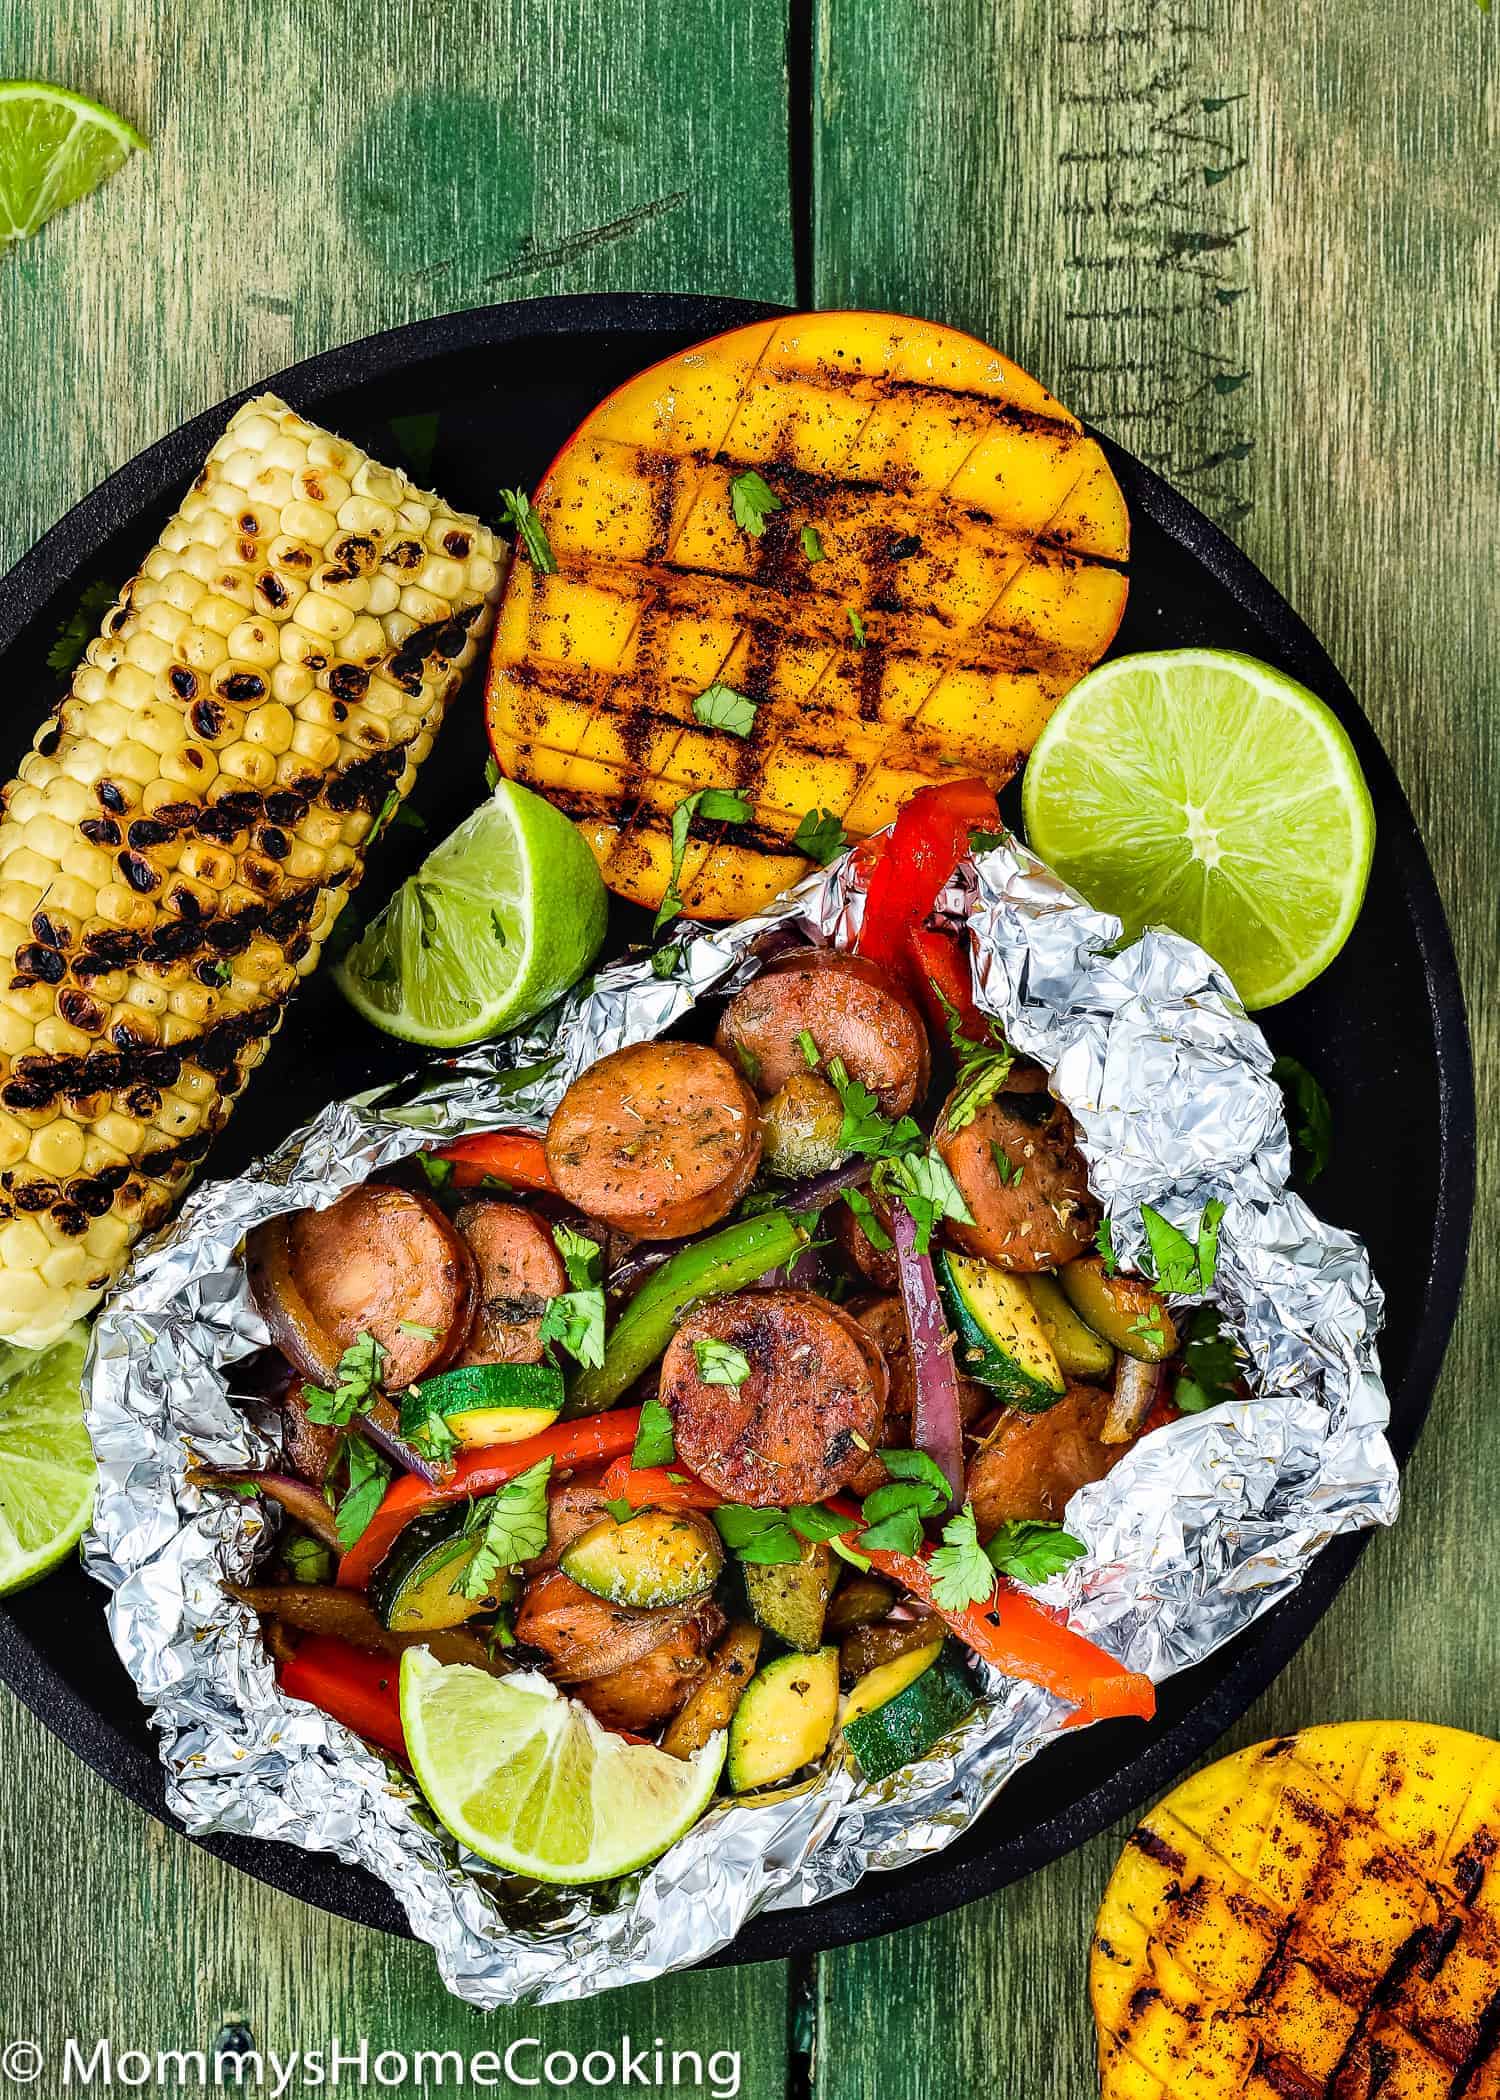 Sausage and Veggies Foil Packets on a plate with grilled mangoes and corn